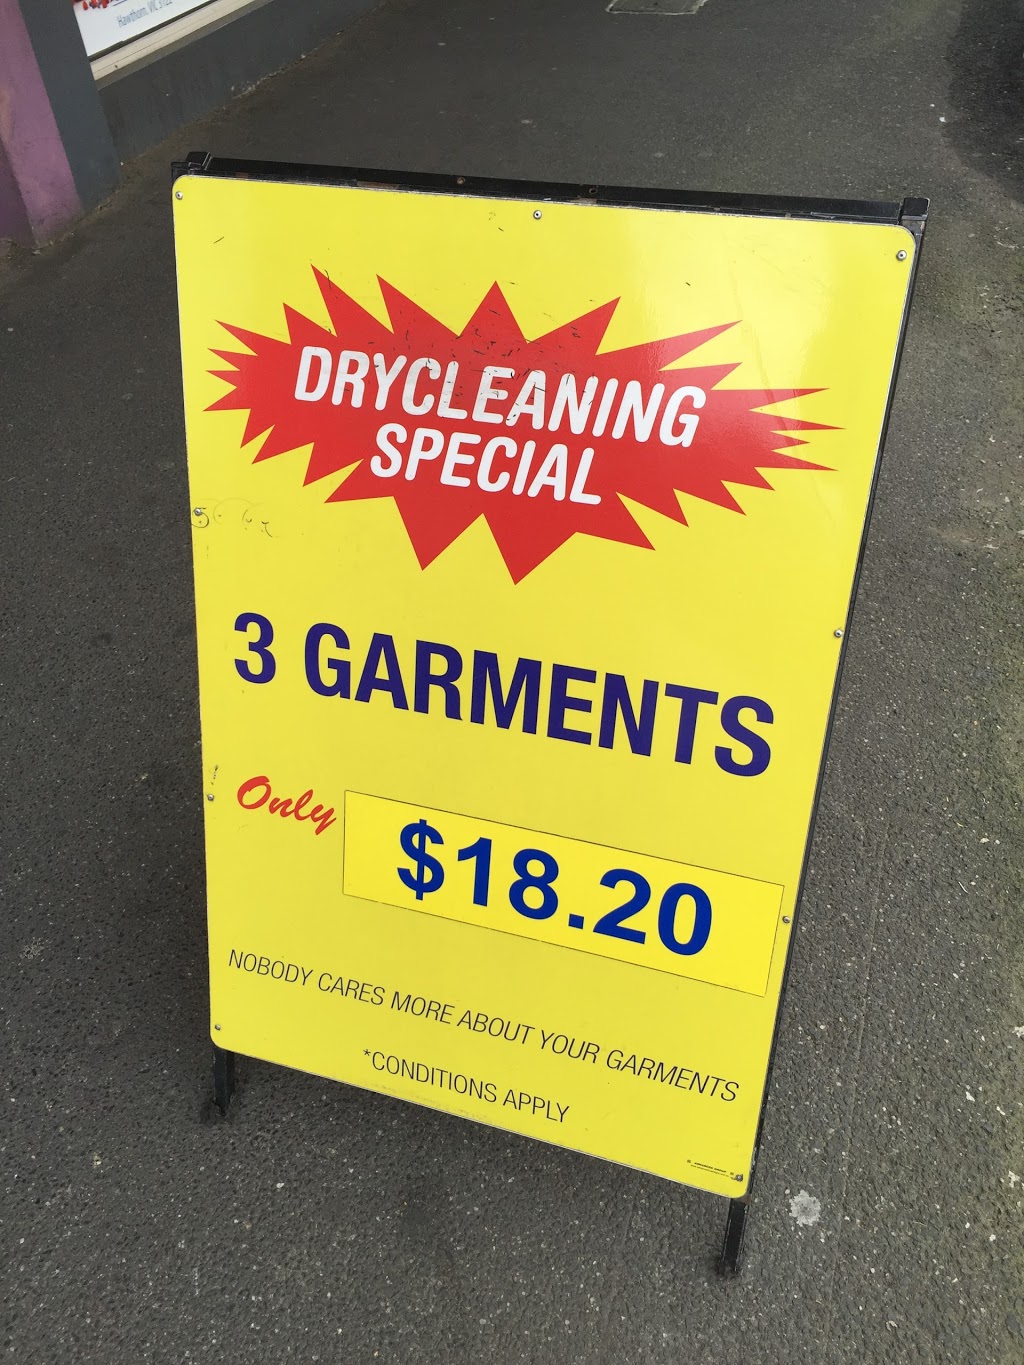 Coin Laundry & Dry Cleaning | 737 Glenferrie Rd, Hawthorn VIC 3122, Australia | Phone: 0451 780 502